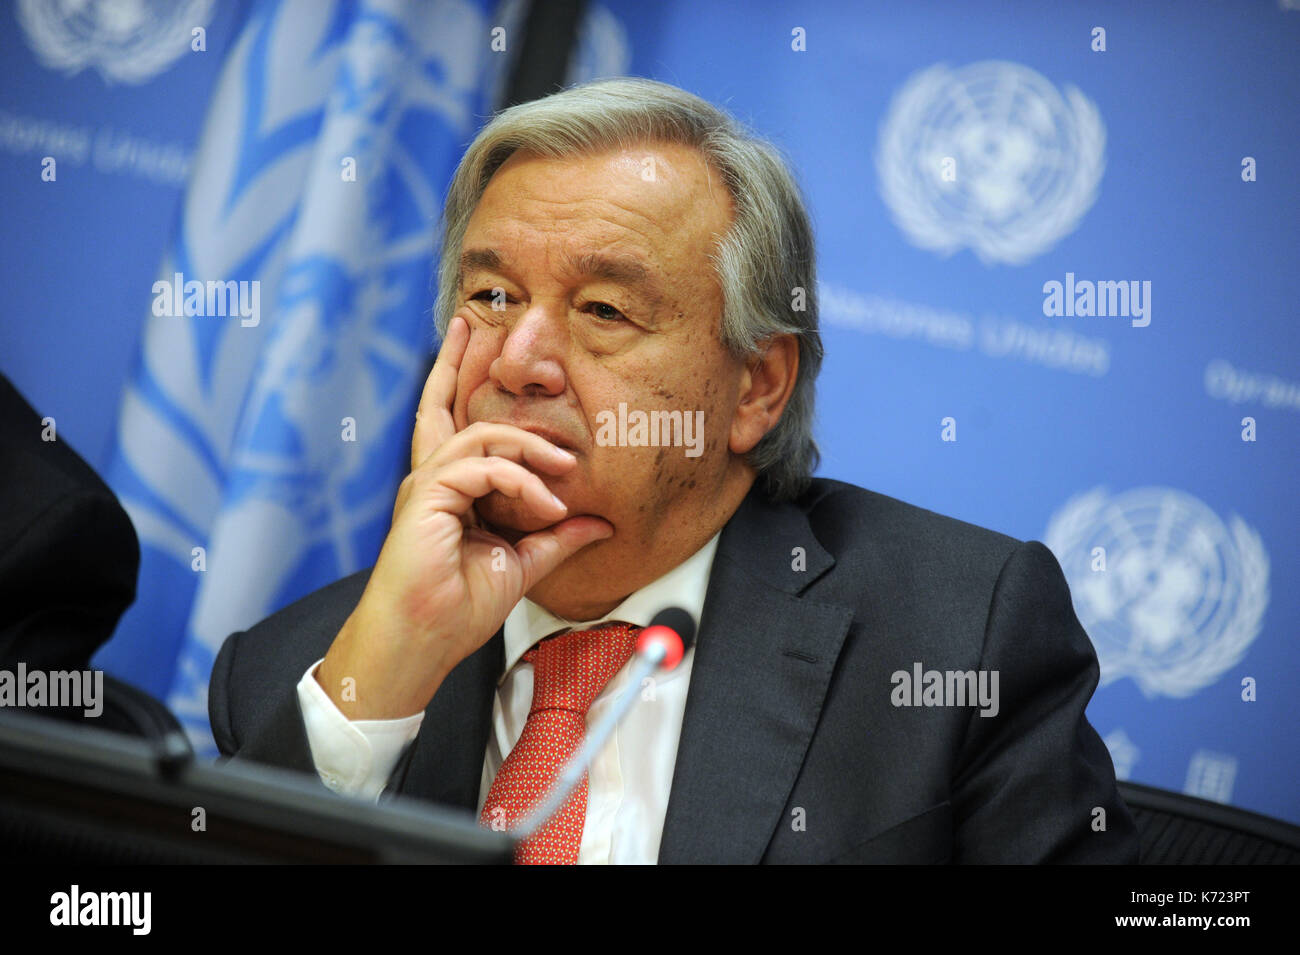 New York, Usa, USA. 13th Sep, 2017. United Nations Secretary-General - António Guterres speaks during a press briefing ahead of the United Nations General Assembly meeting, Guterres spoke about the situation in Myanmar, North Korea and elsewhere in UN headquarters in Manhattan of New York, United States on September 13, 2017. Credit: Mpi122/Media Punch/Alamy Live News Stock Photo